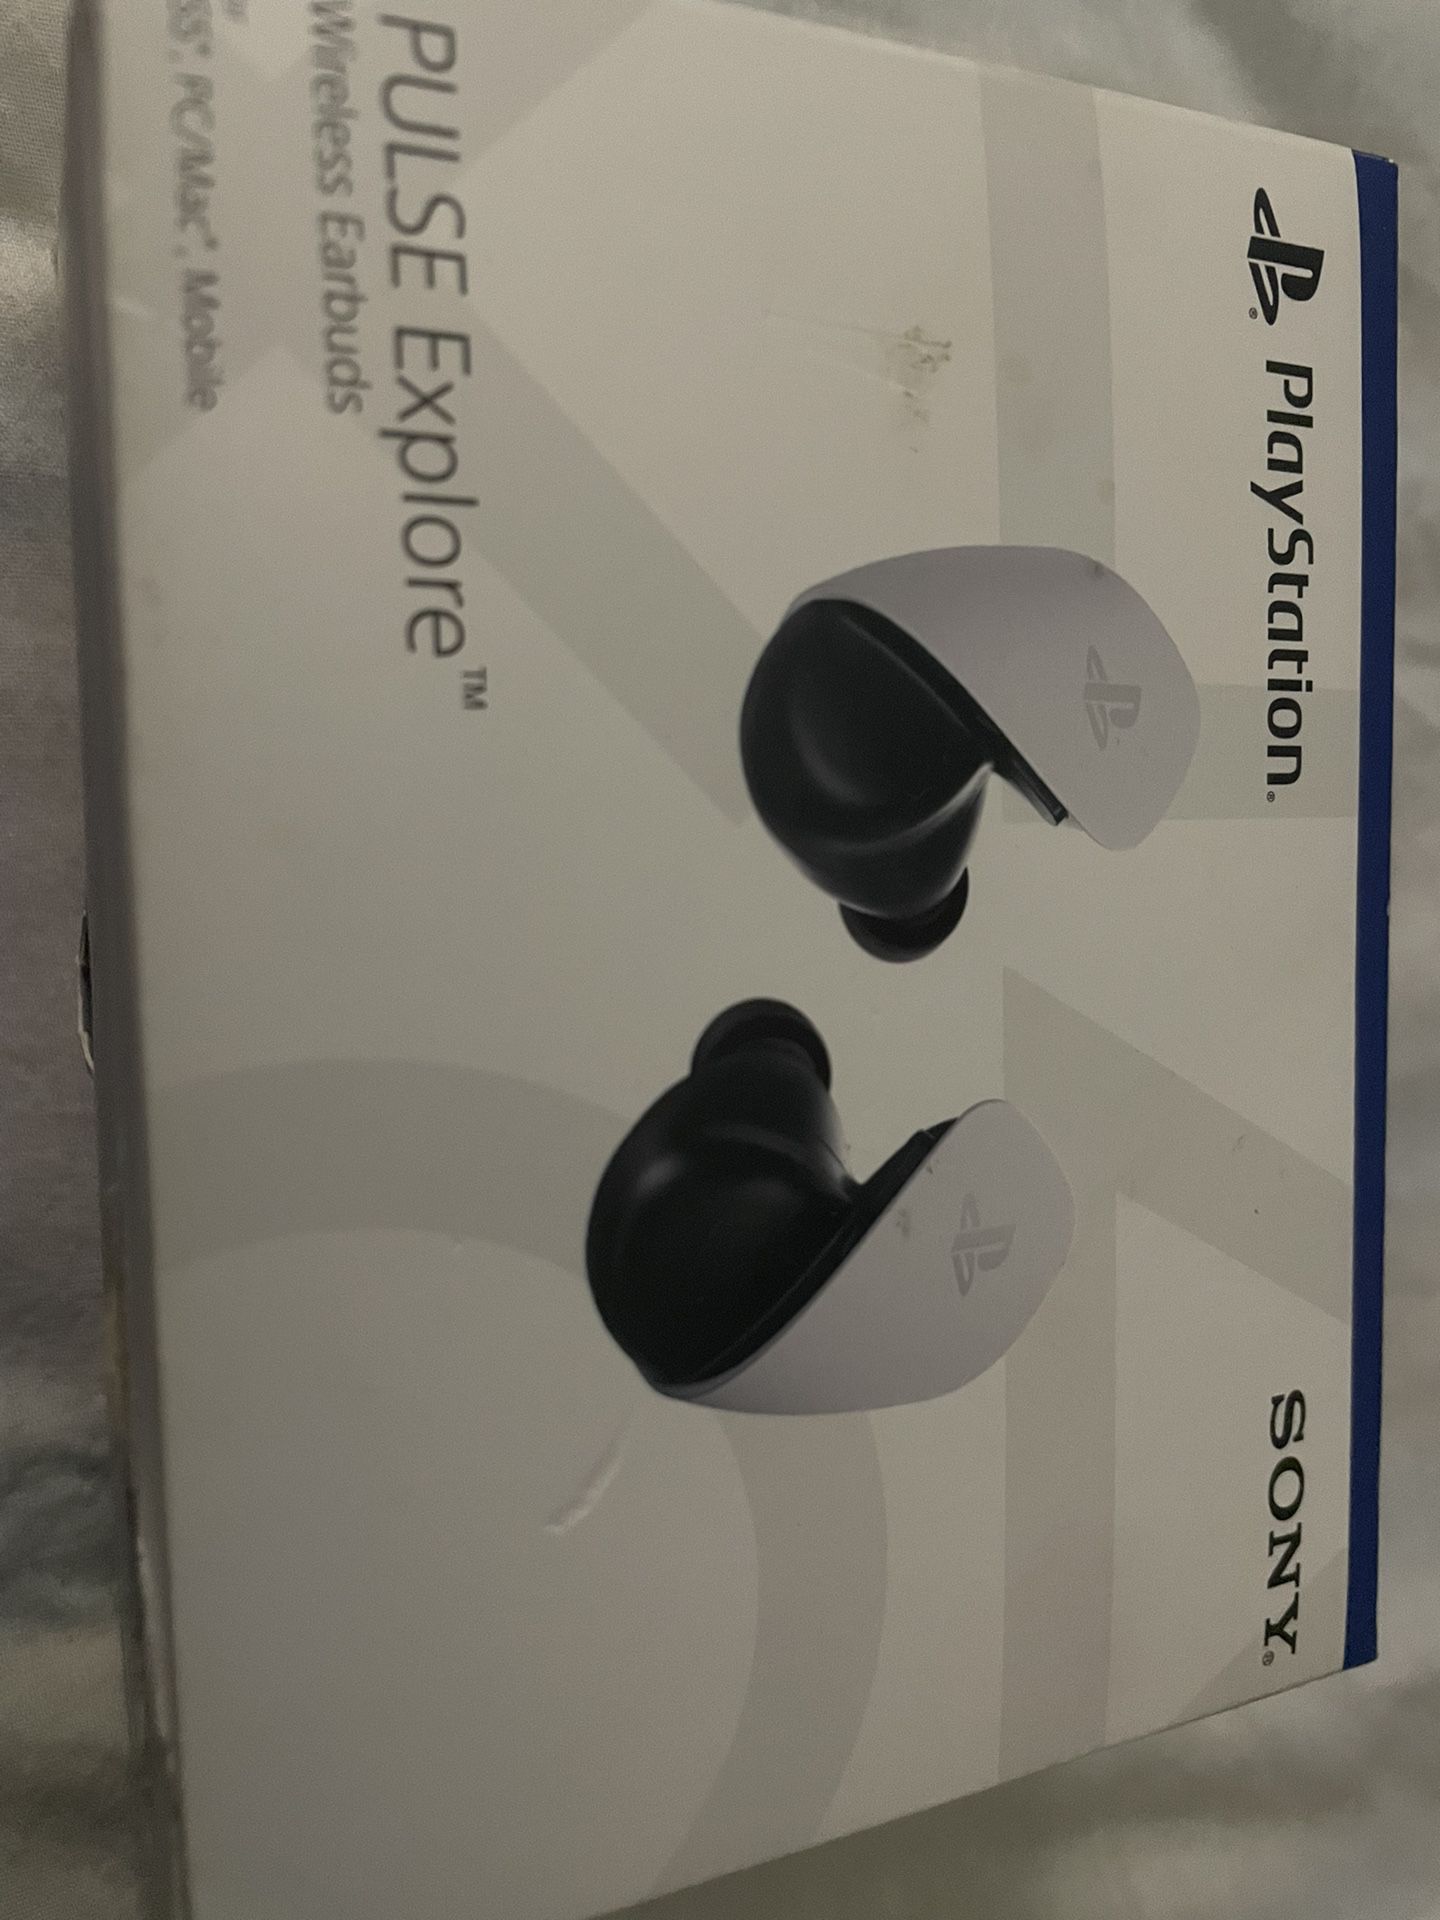 PlayStation Pulse Explore Wireless Earbuds